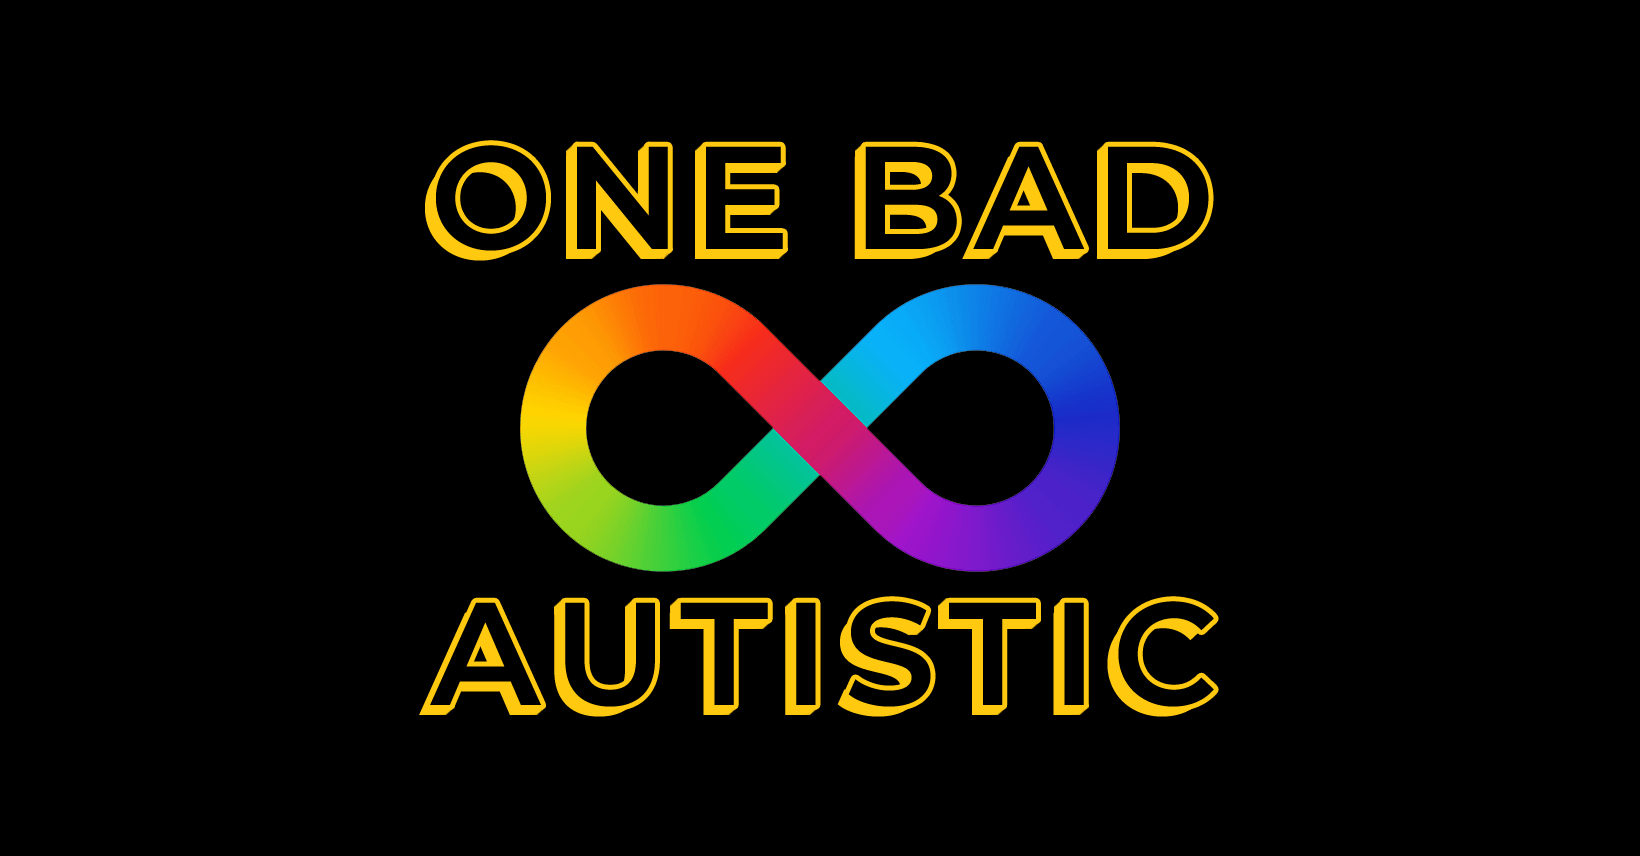 The text uses a 3D font that mimics the One Bad Mother podcast logo and is yellow on a black background. It reads "One Bad" on the top and "Autistic" on the bottom, and between the two lines of text is a large rainbow infinity symbol.